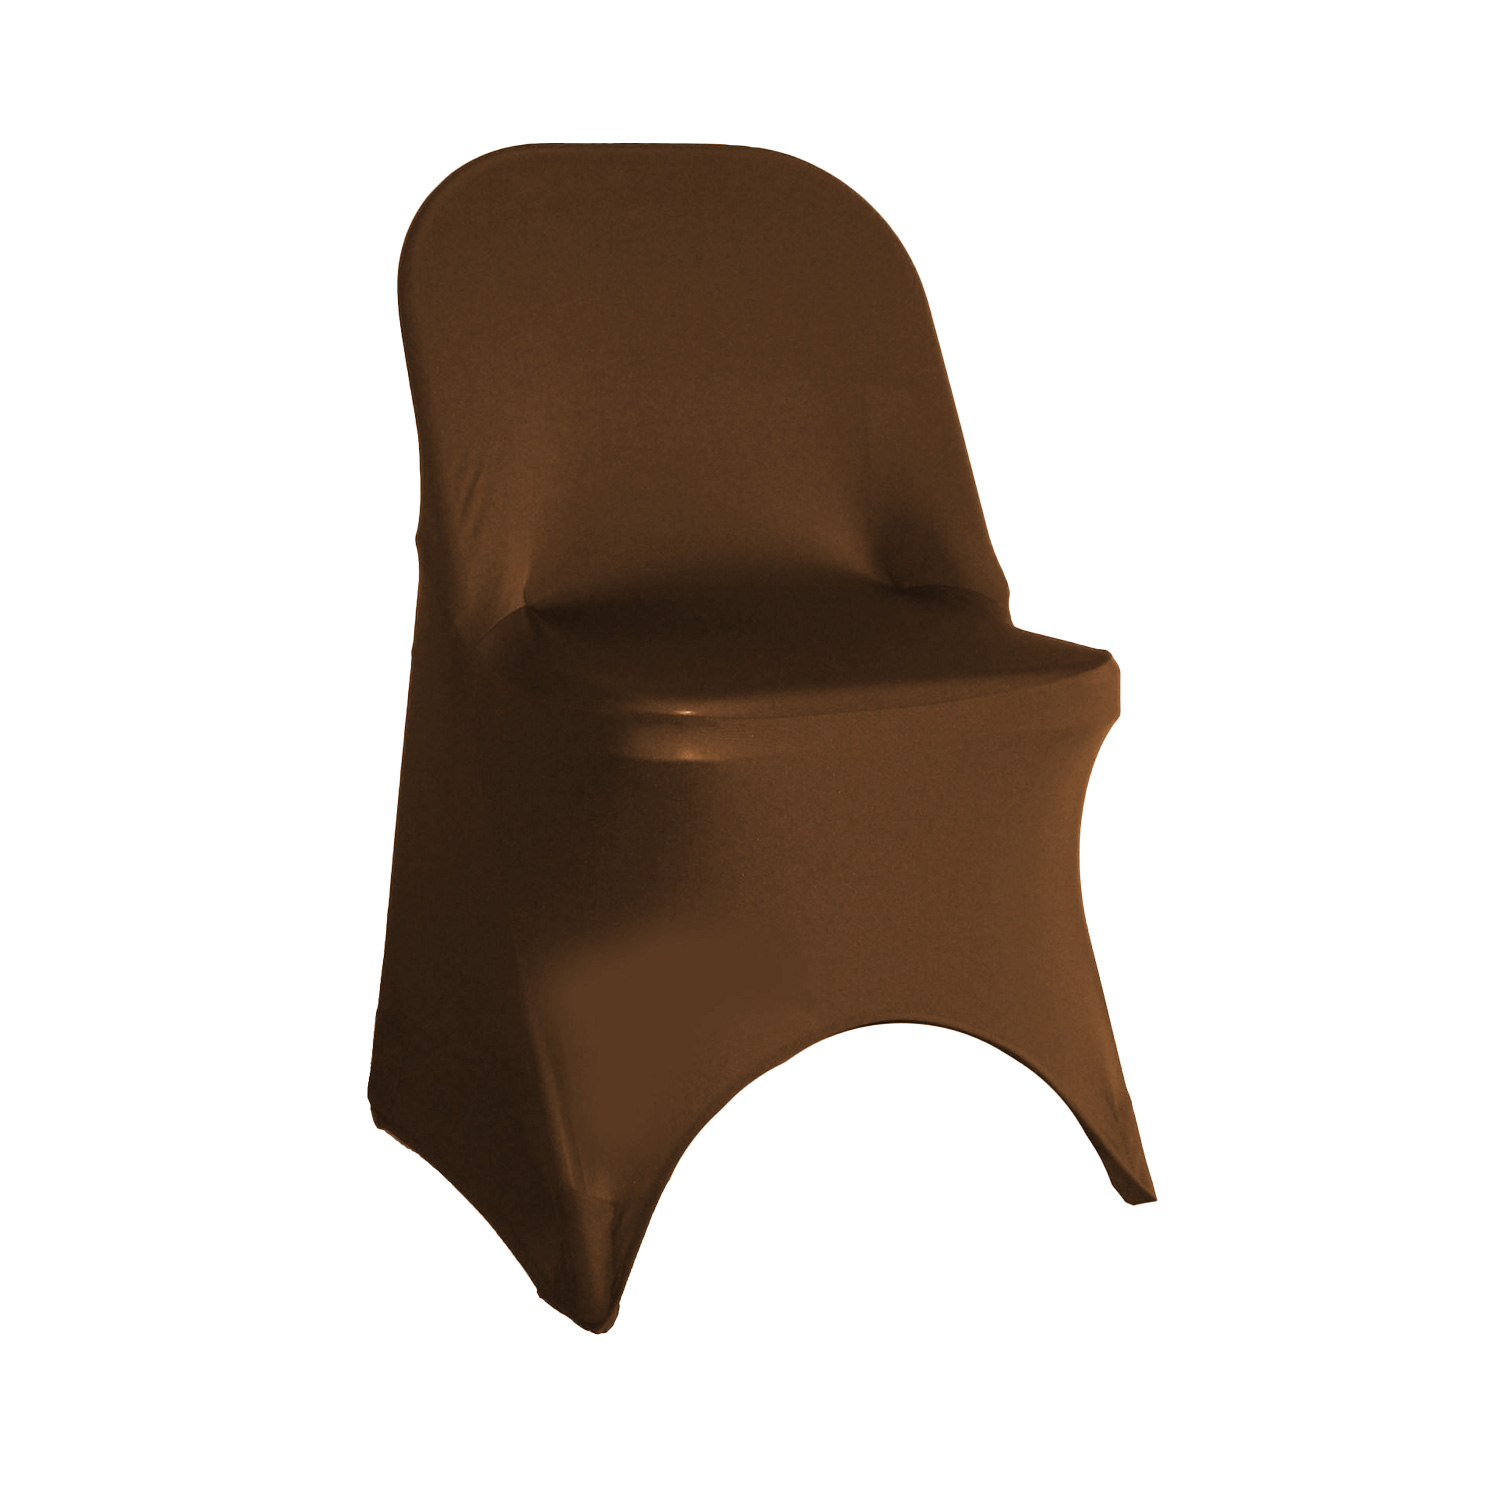 Your Chair Covers - Spandex Folding Chair Cover Chocolate Brown for Wedding, Party, Birthday, Patio, etc. - image 1 of 3